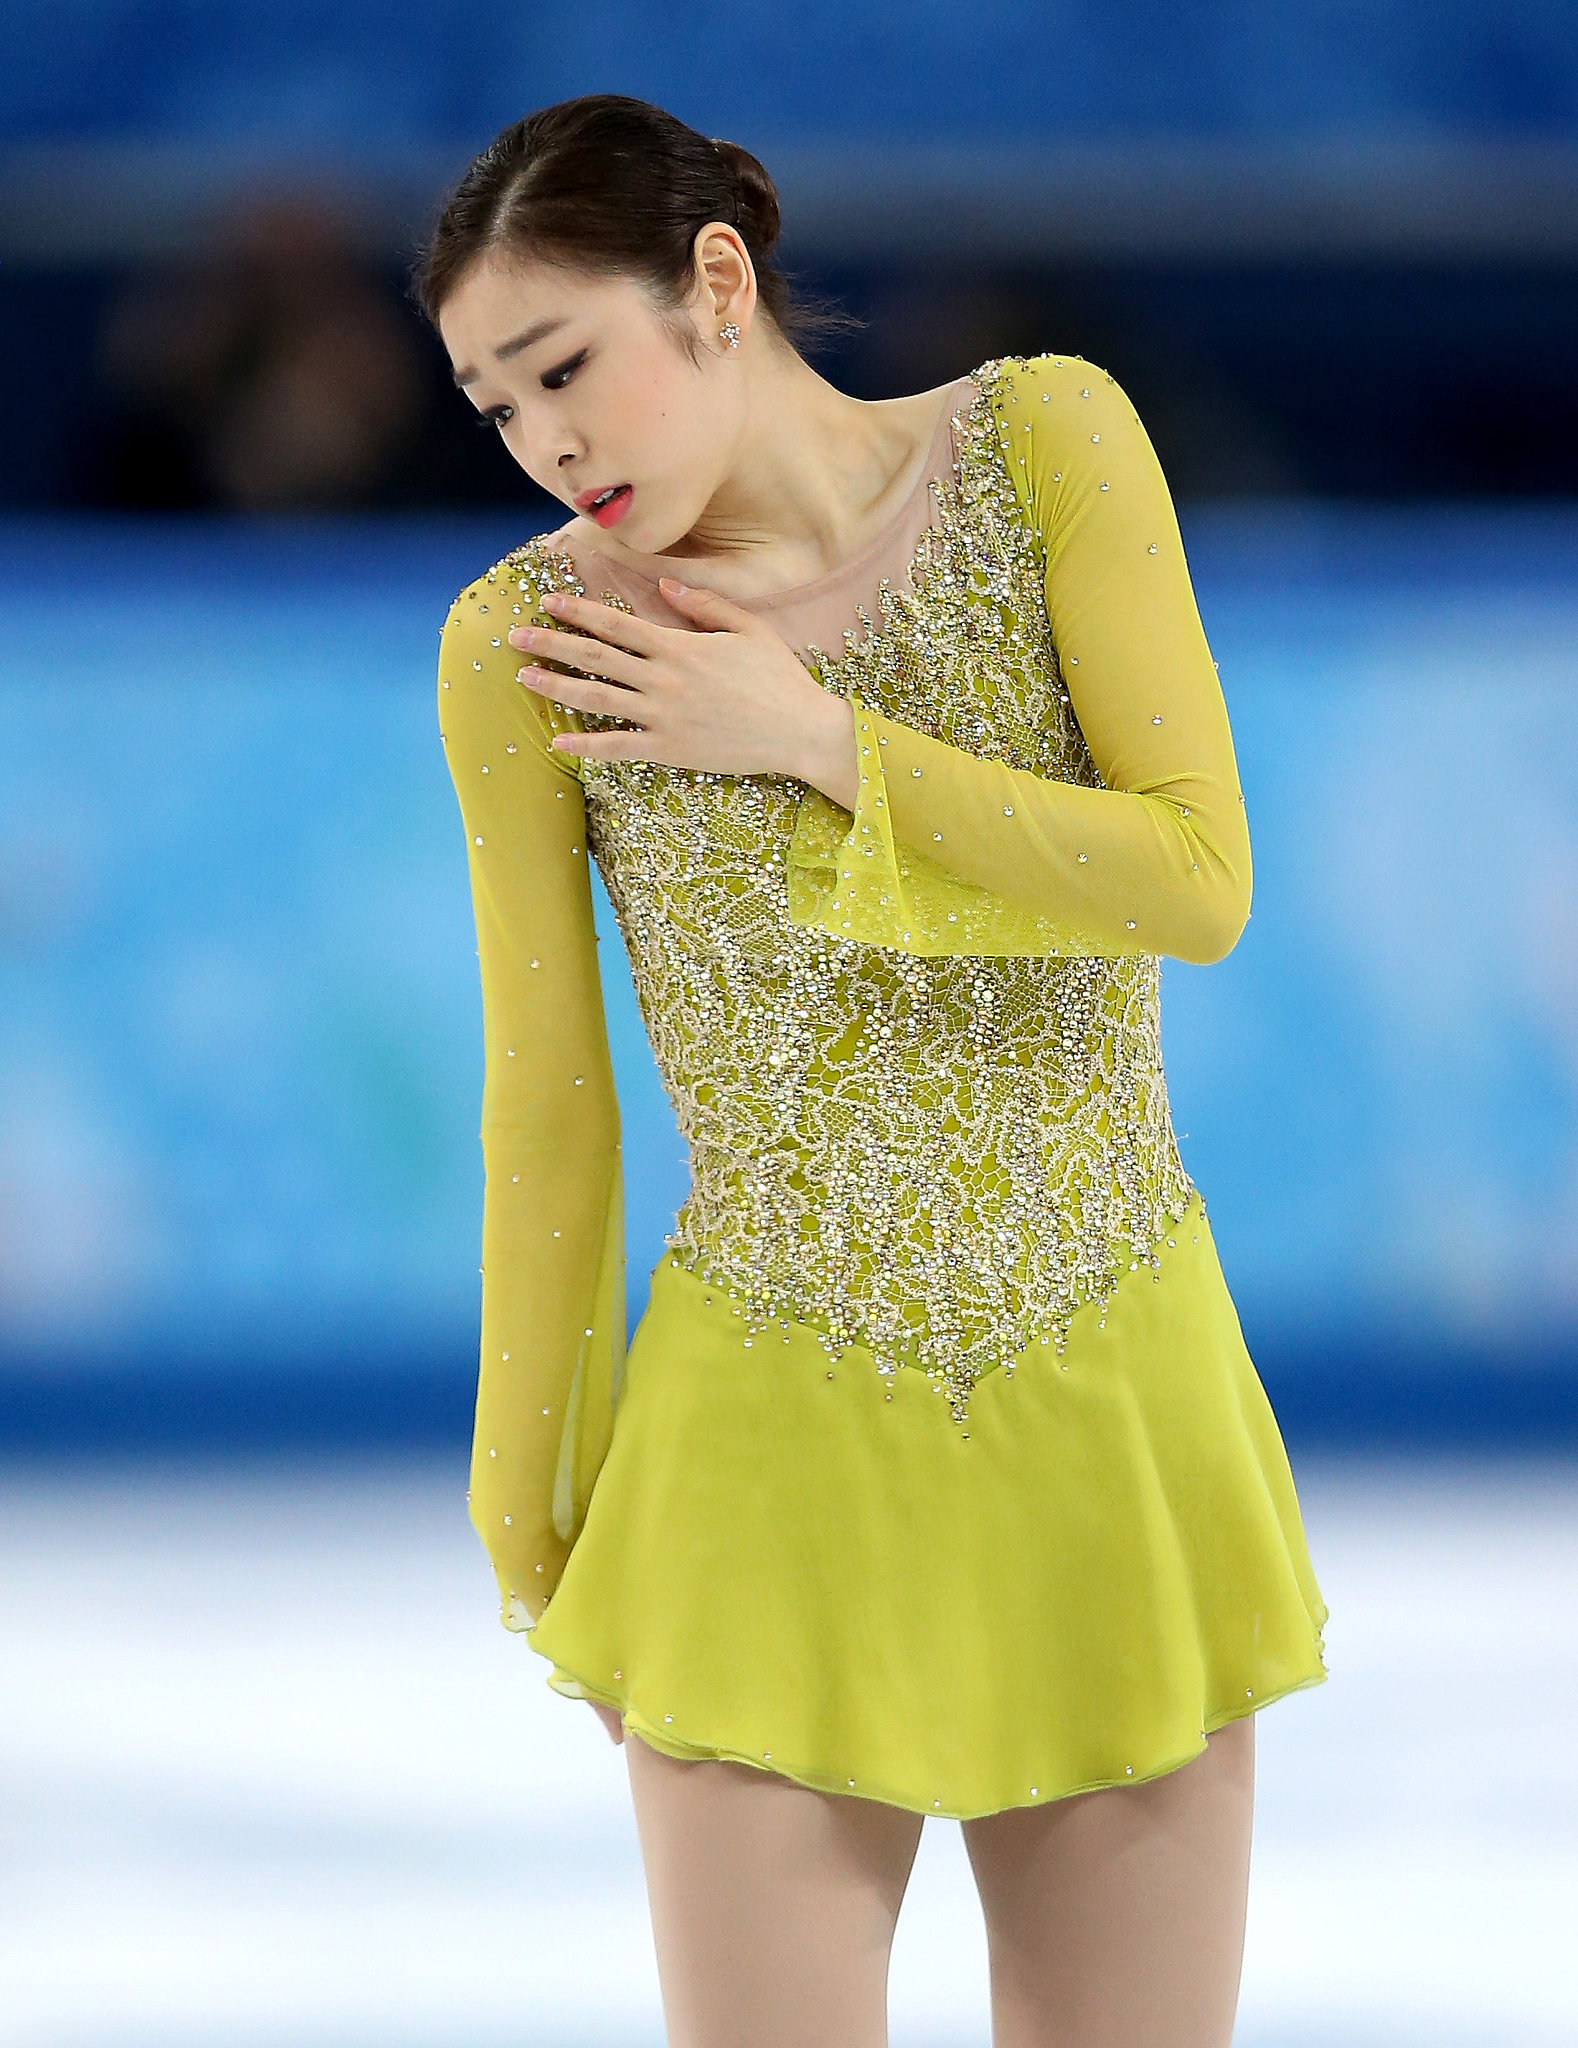 Yuna Kim, South Korea Hit the Ice With the Best Olympic Figure